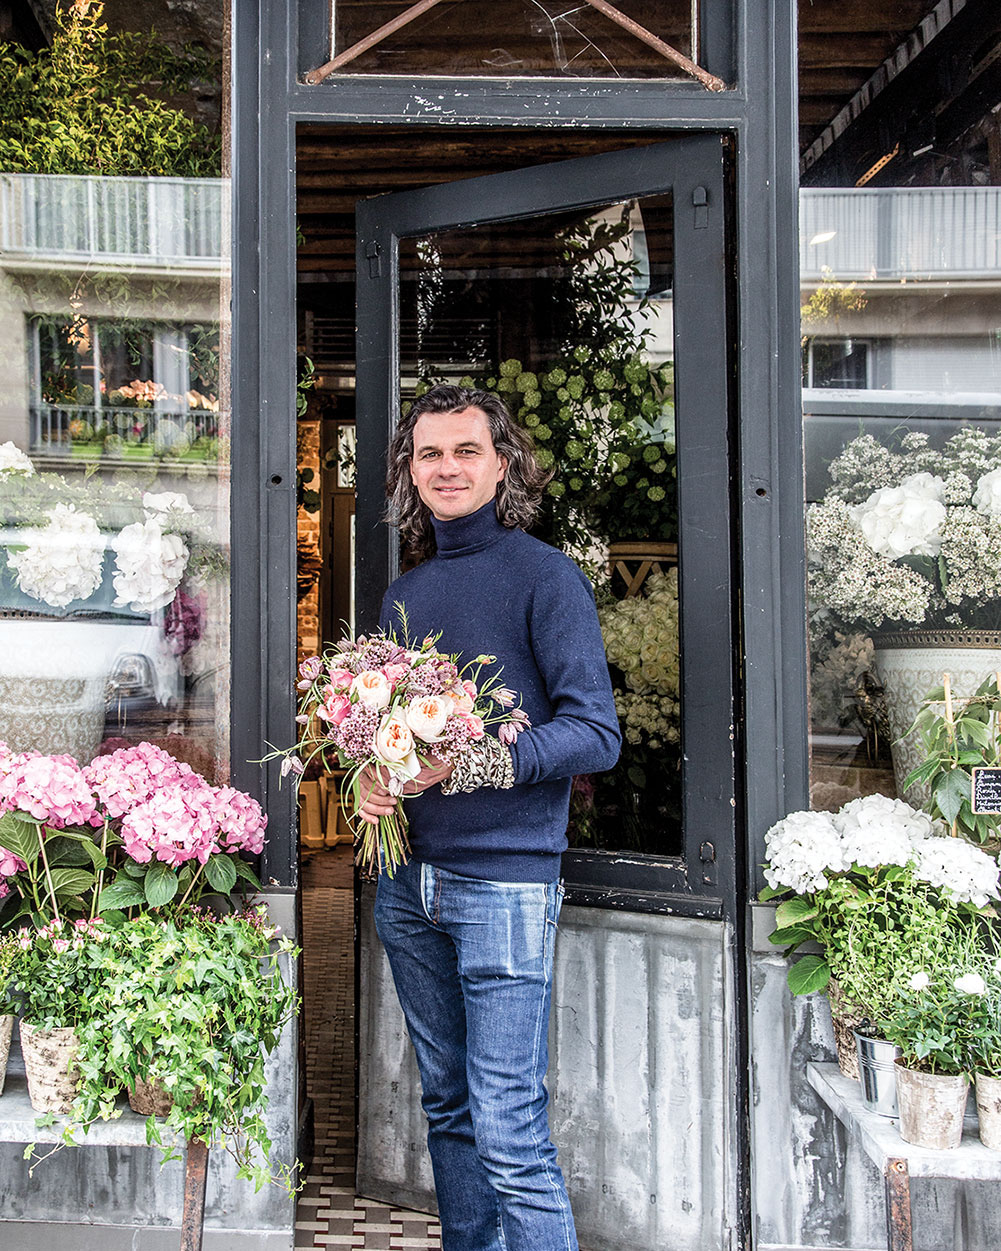 Parisian florist Eric Chauvin, wearing in worn jeans and navy turtleneck, stands at the open door of his French flower shop, holding a bouquet. On either side, window boxes are planted with pink and white flowering hydrangeas and trailing ivy.